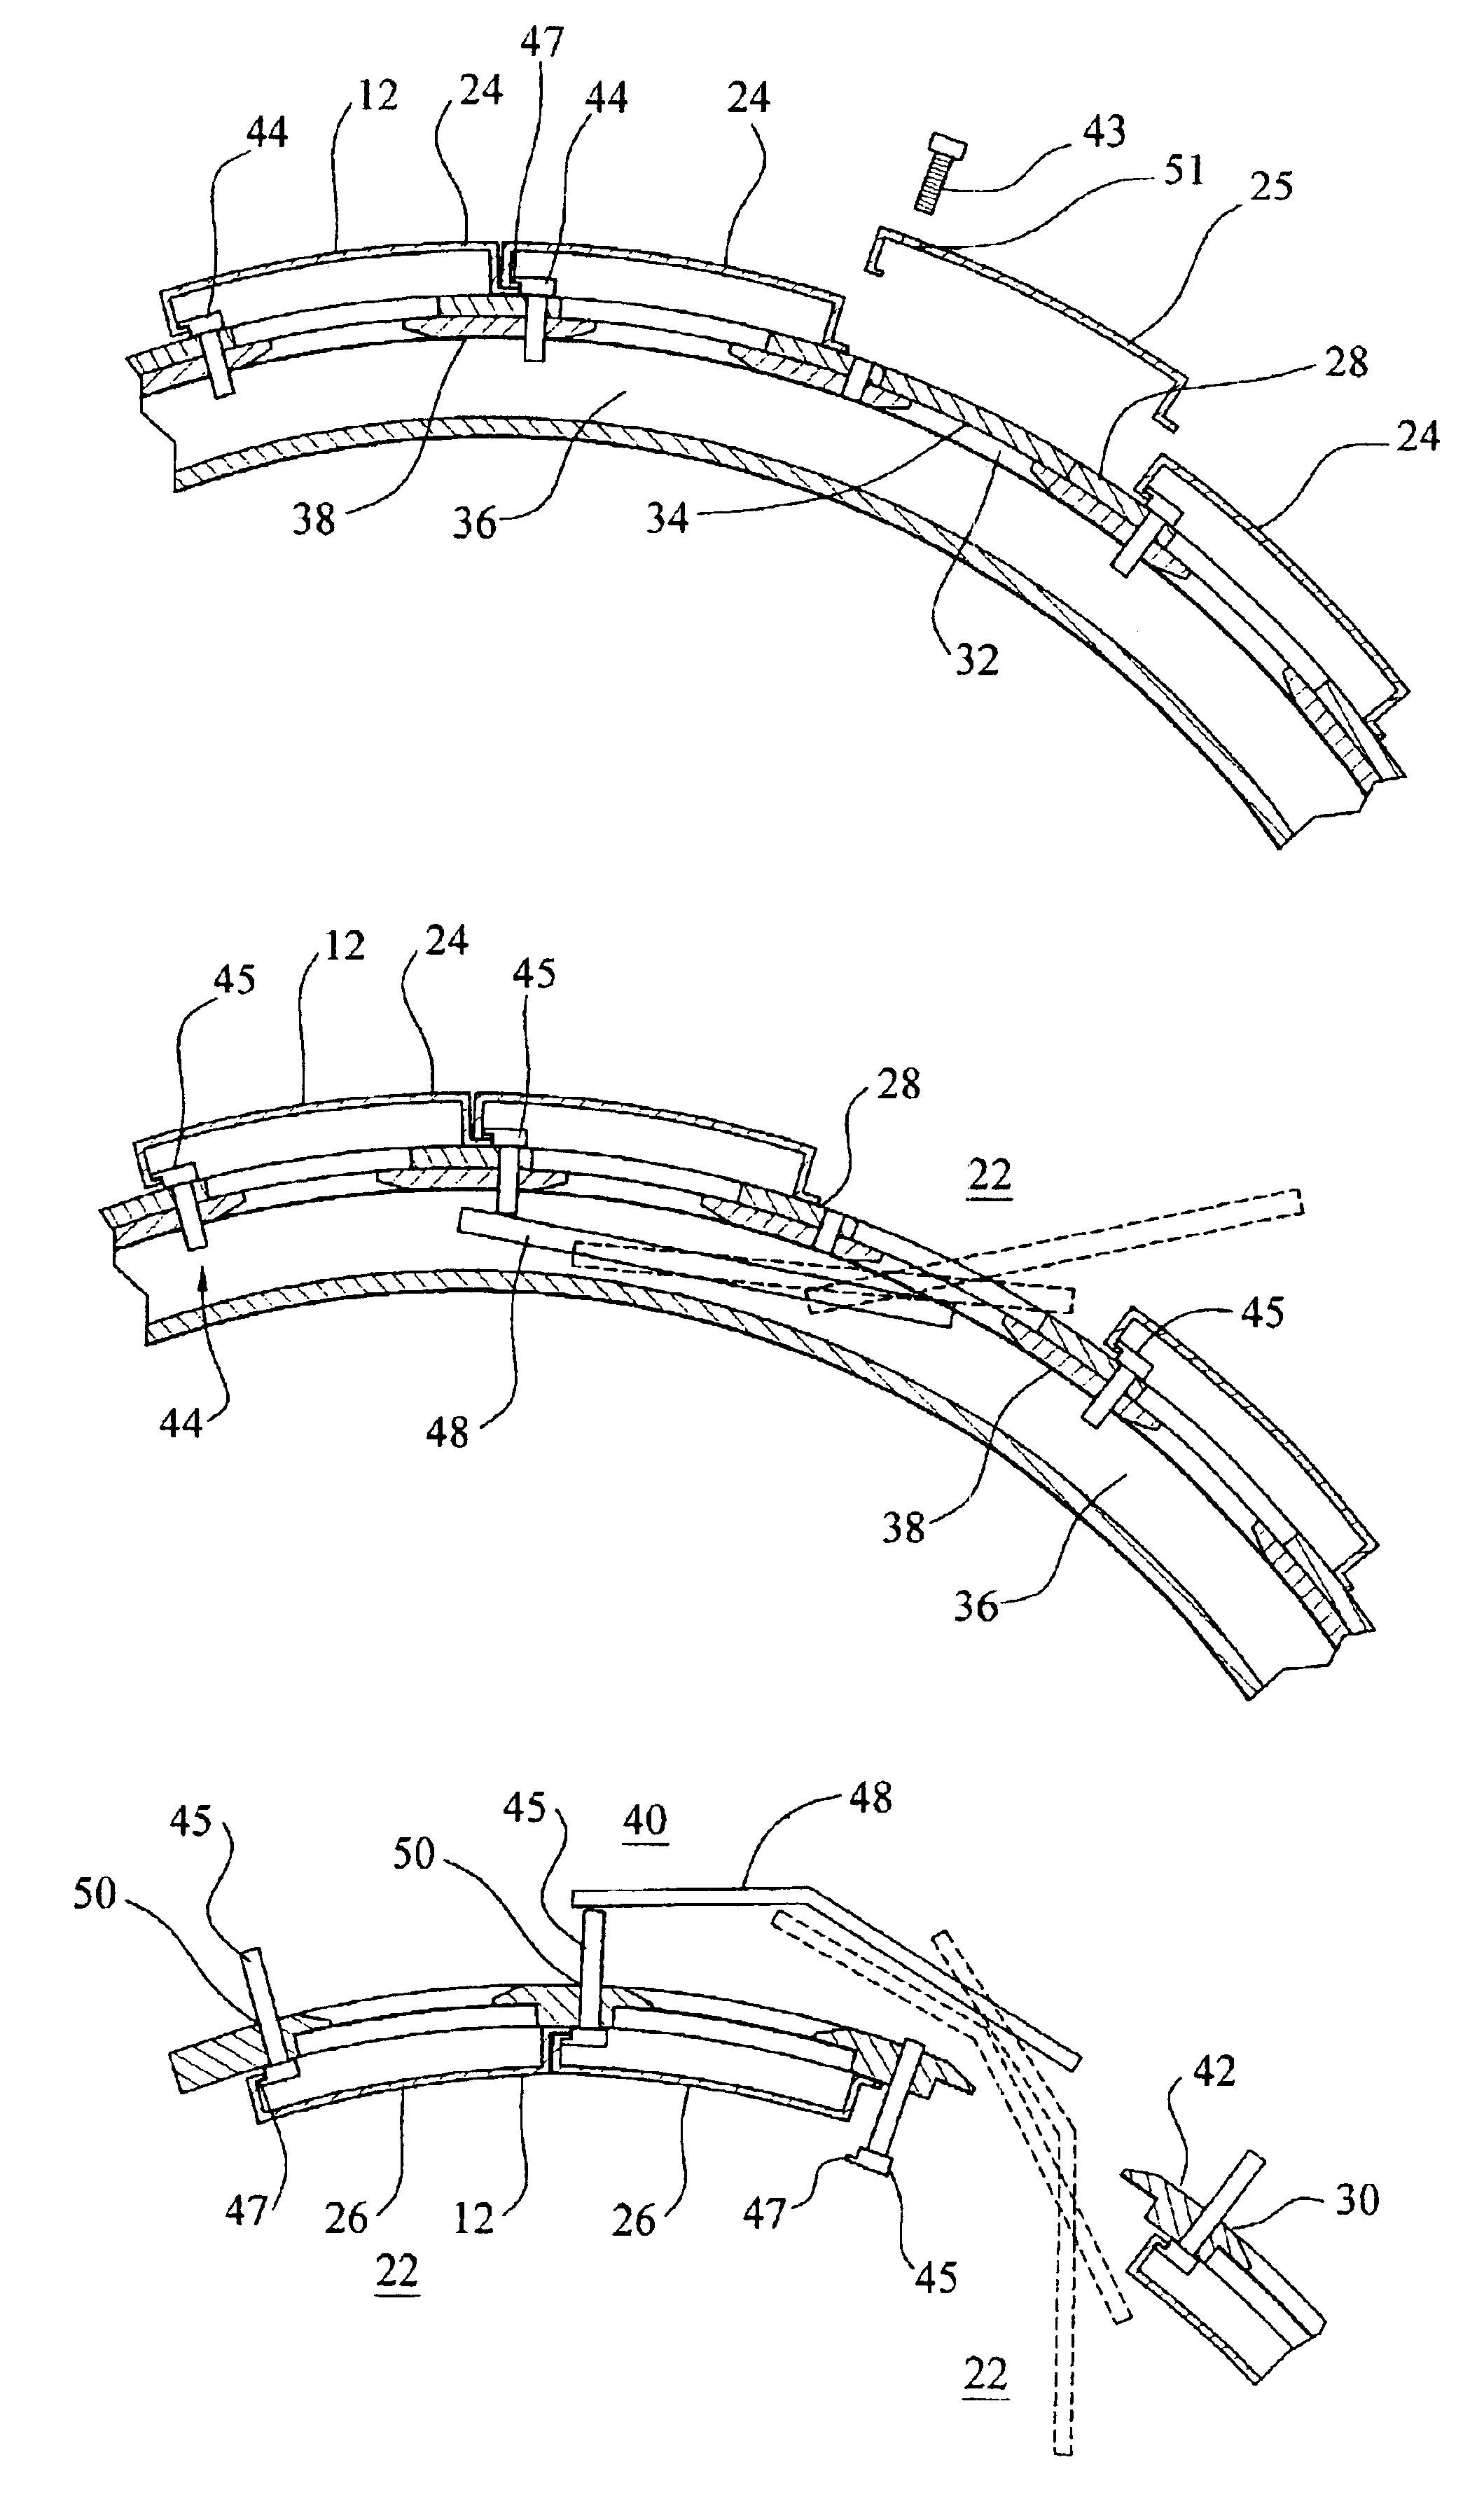 Attachment system for coupling combustor liners to a carrier of a turbine combustor